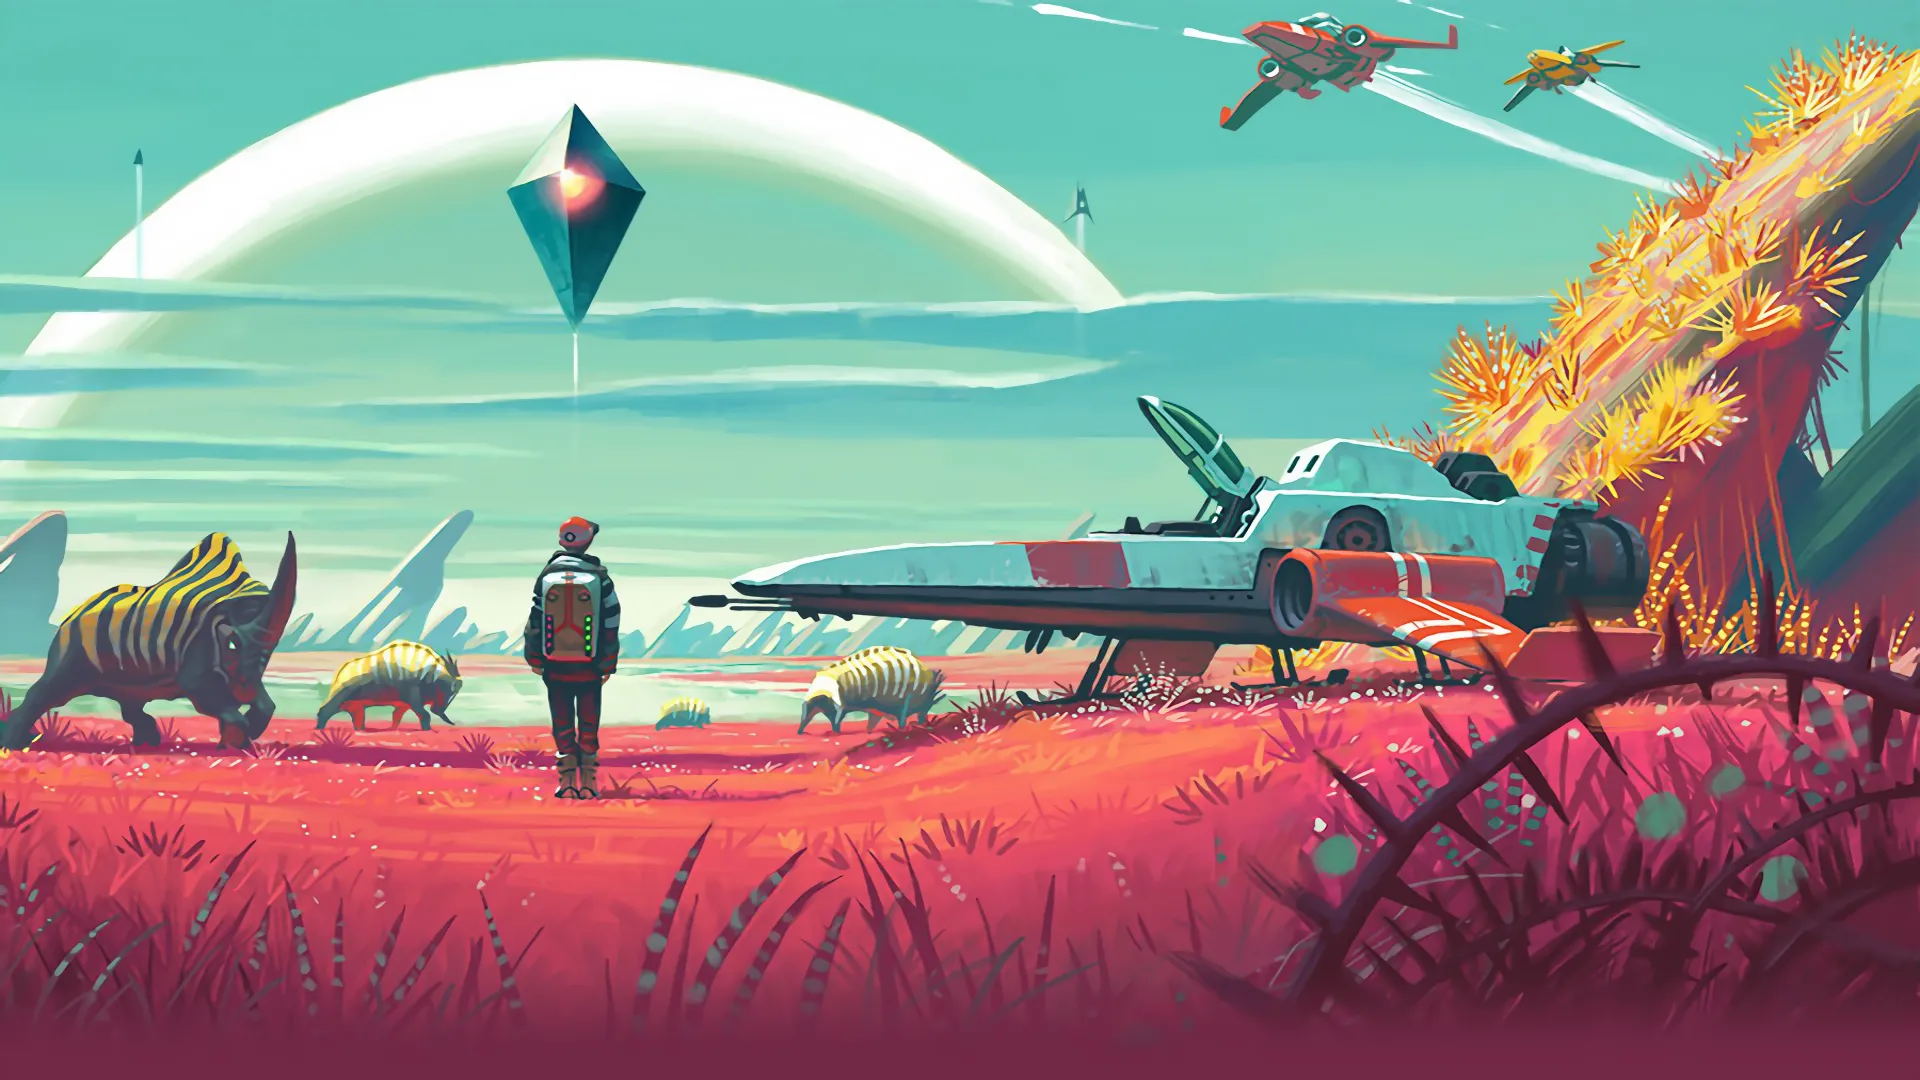 ‘No Man’s Sky’ Being Challenged for False Advertising